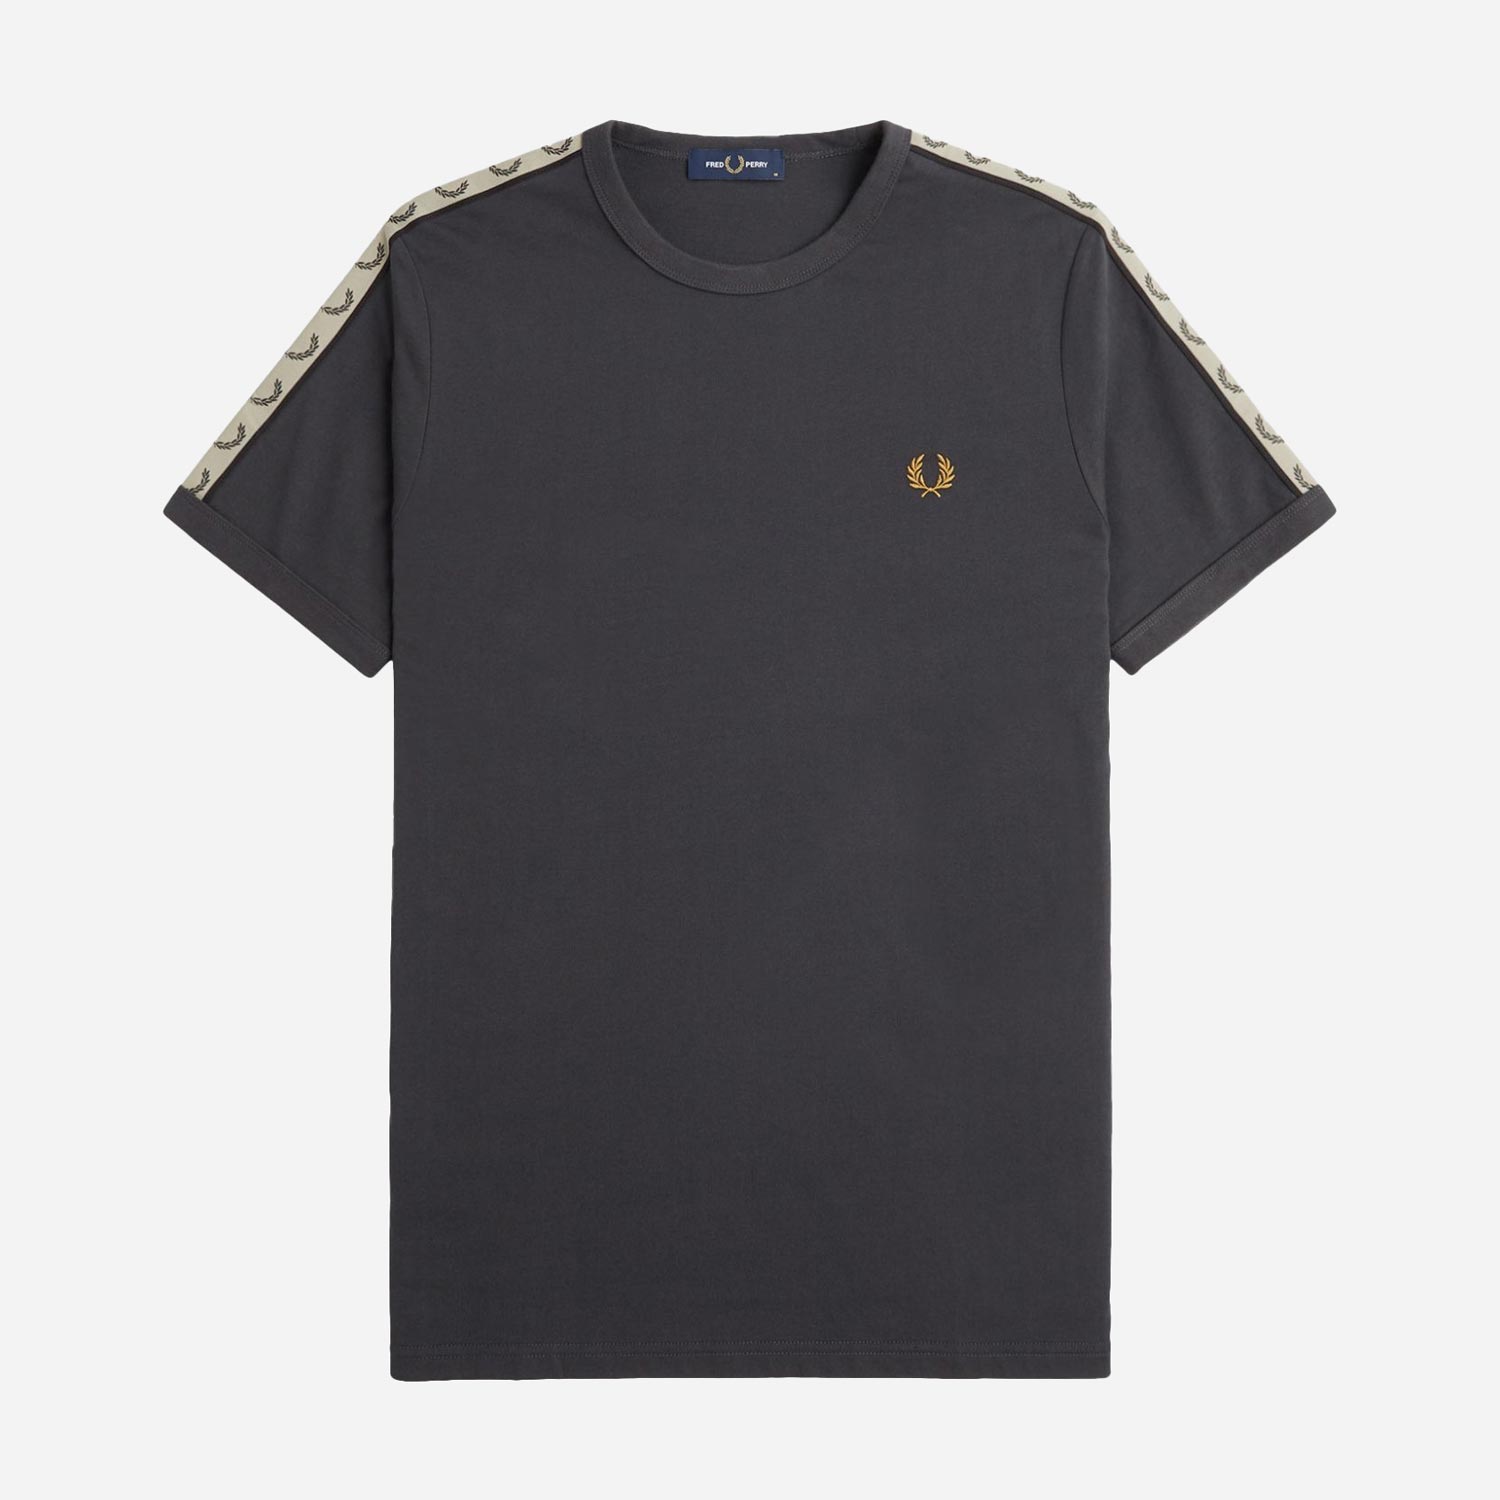 Fred Perry Contrast Tape Regular Fit Short Sleeve Ringer Tee - Anchor Grey/Black